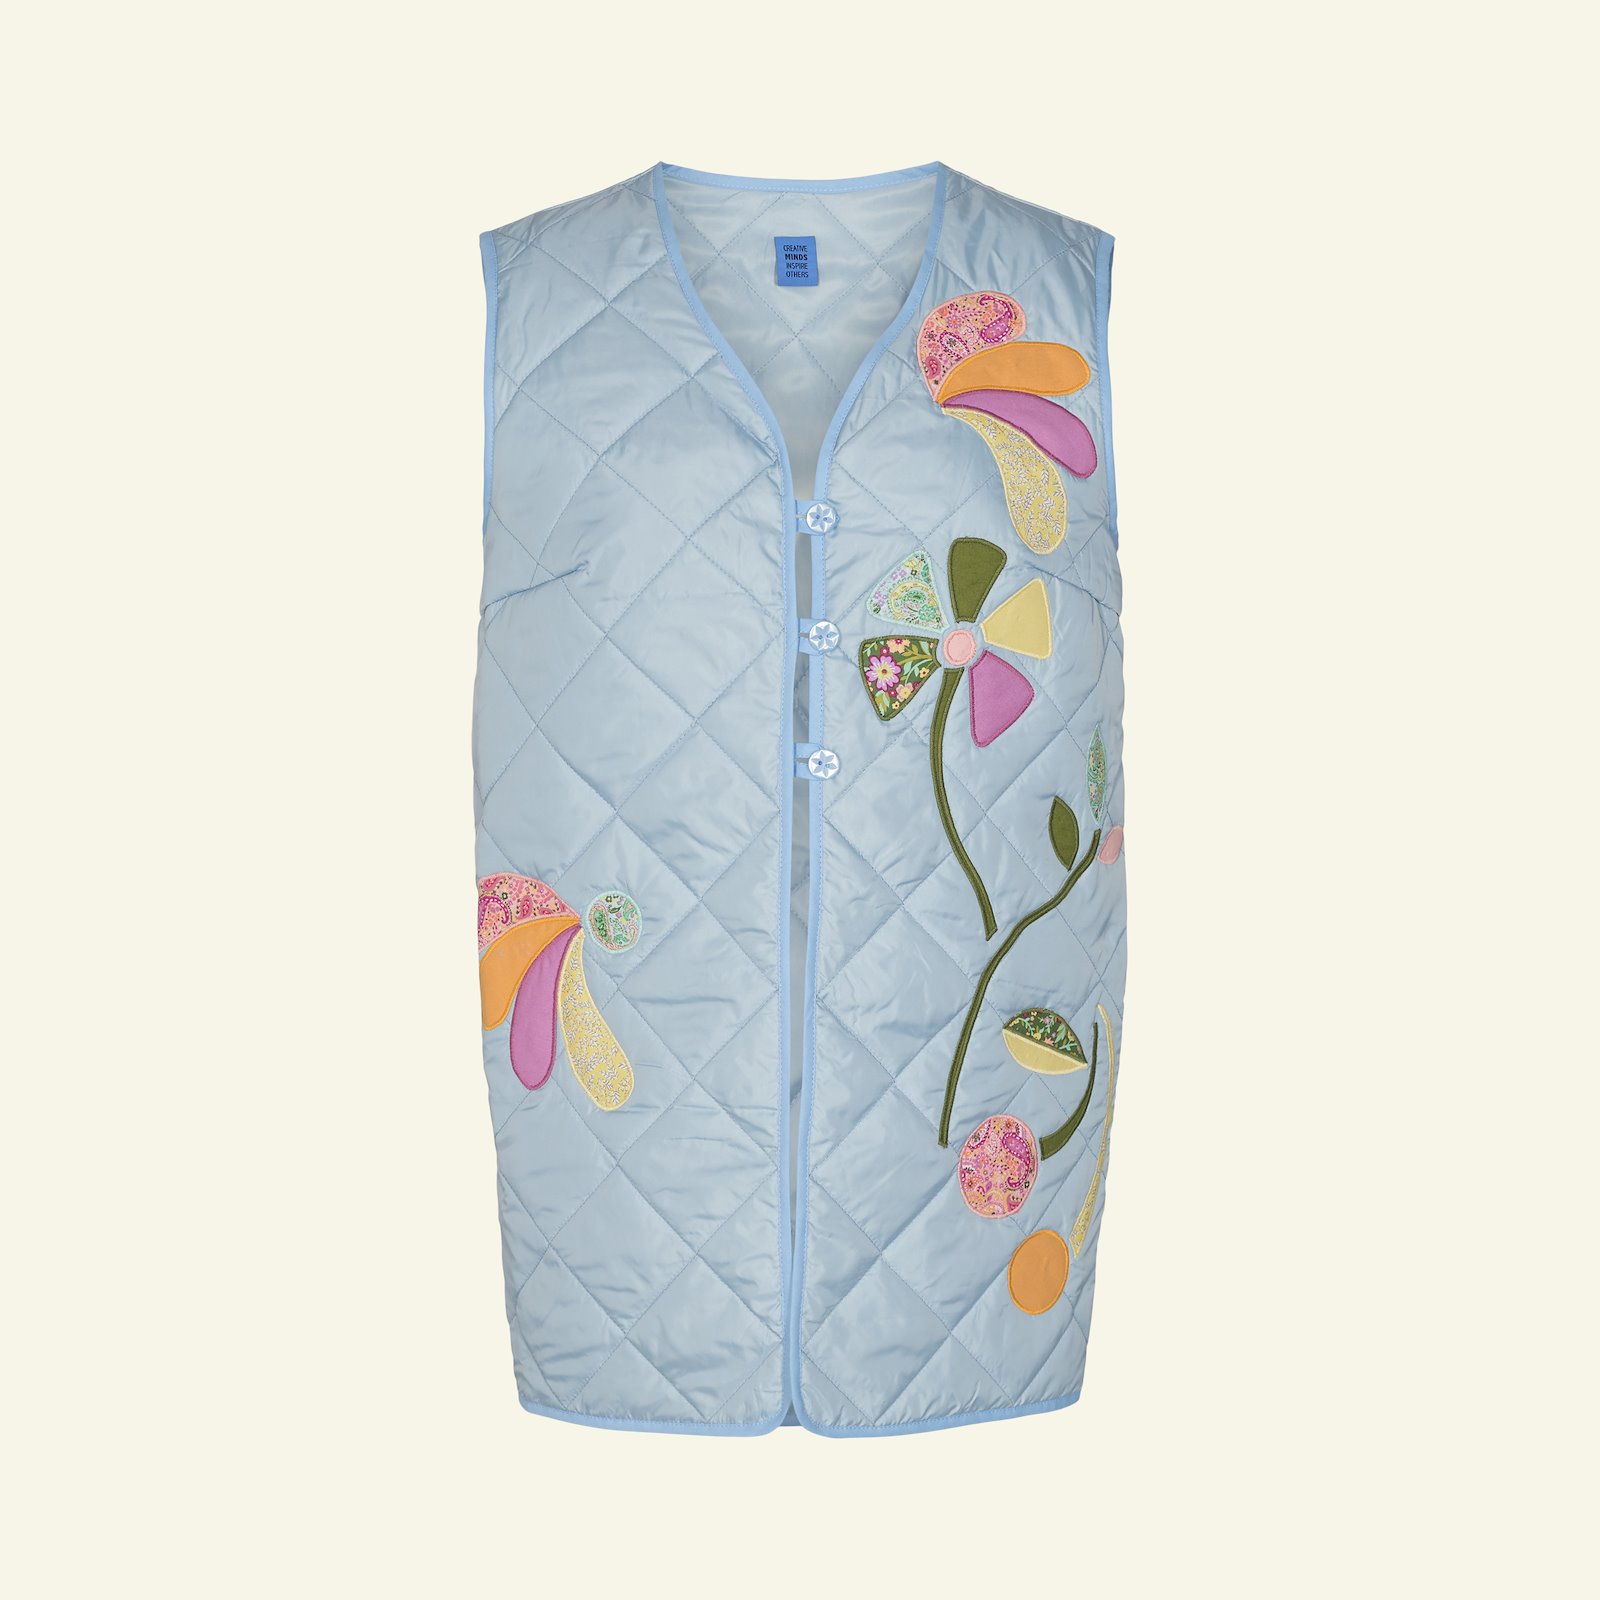 Quilted jacket and waistcoat, 46/18 p24047_920225_66019_33224_sskit